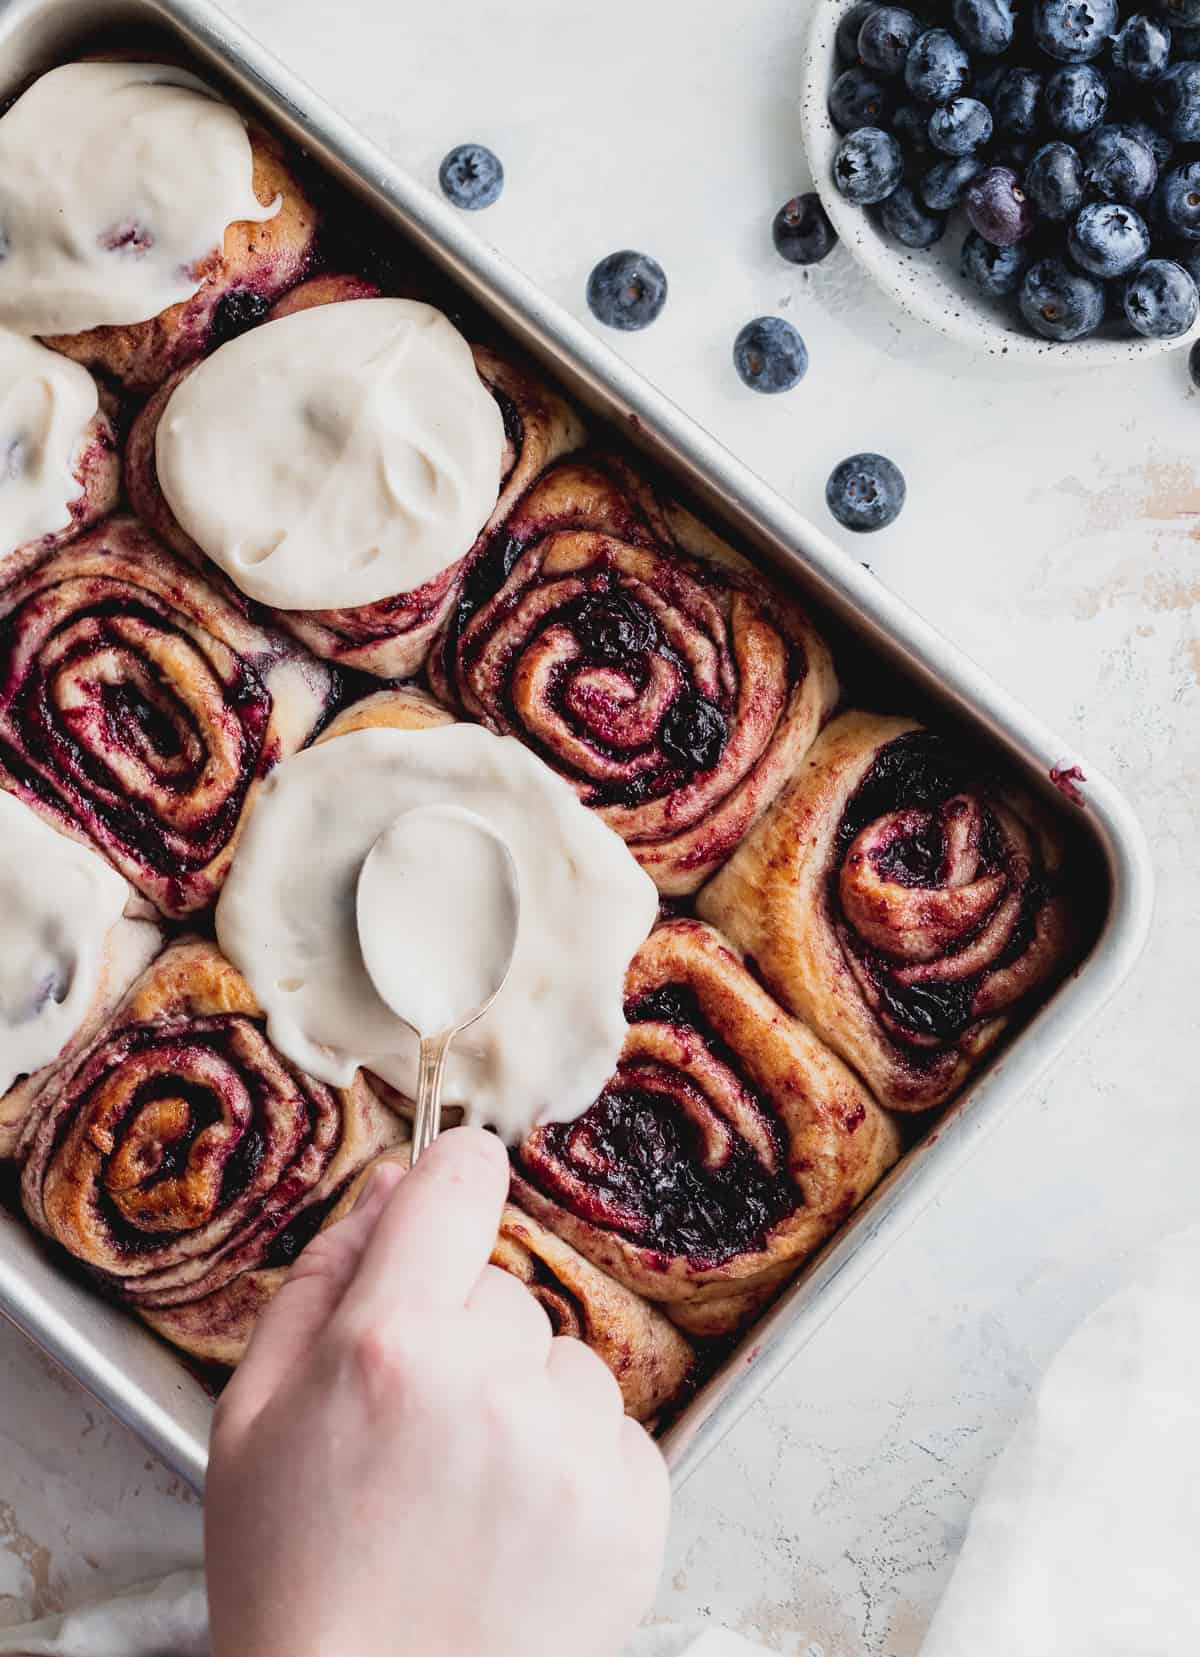 Spreading icing on top of blueberry cinnamon rolls.